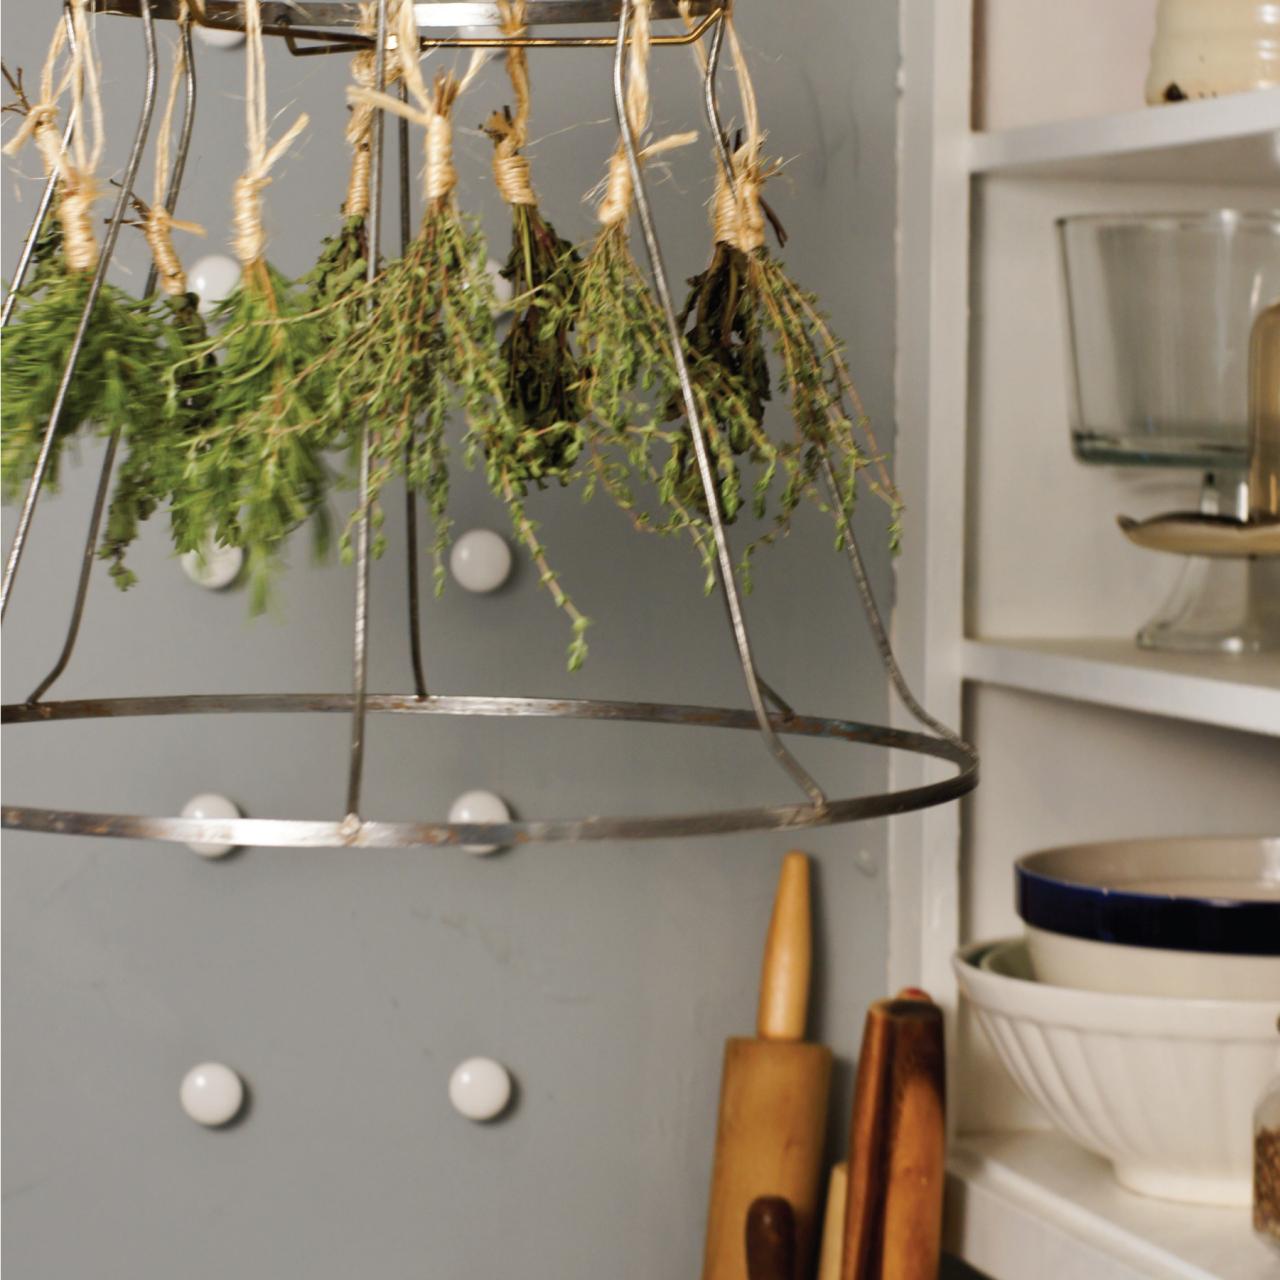 DIY Herb Drying Rack using common household materials.